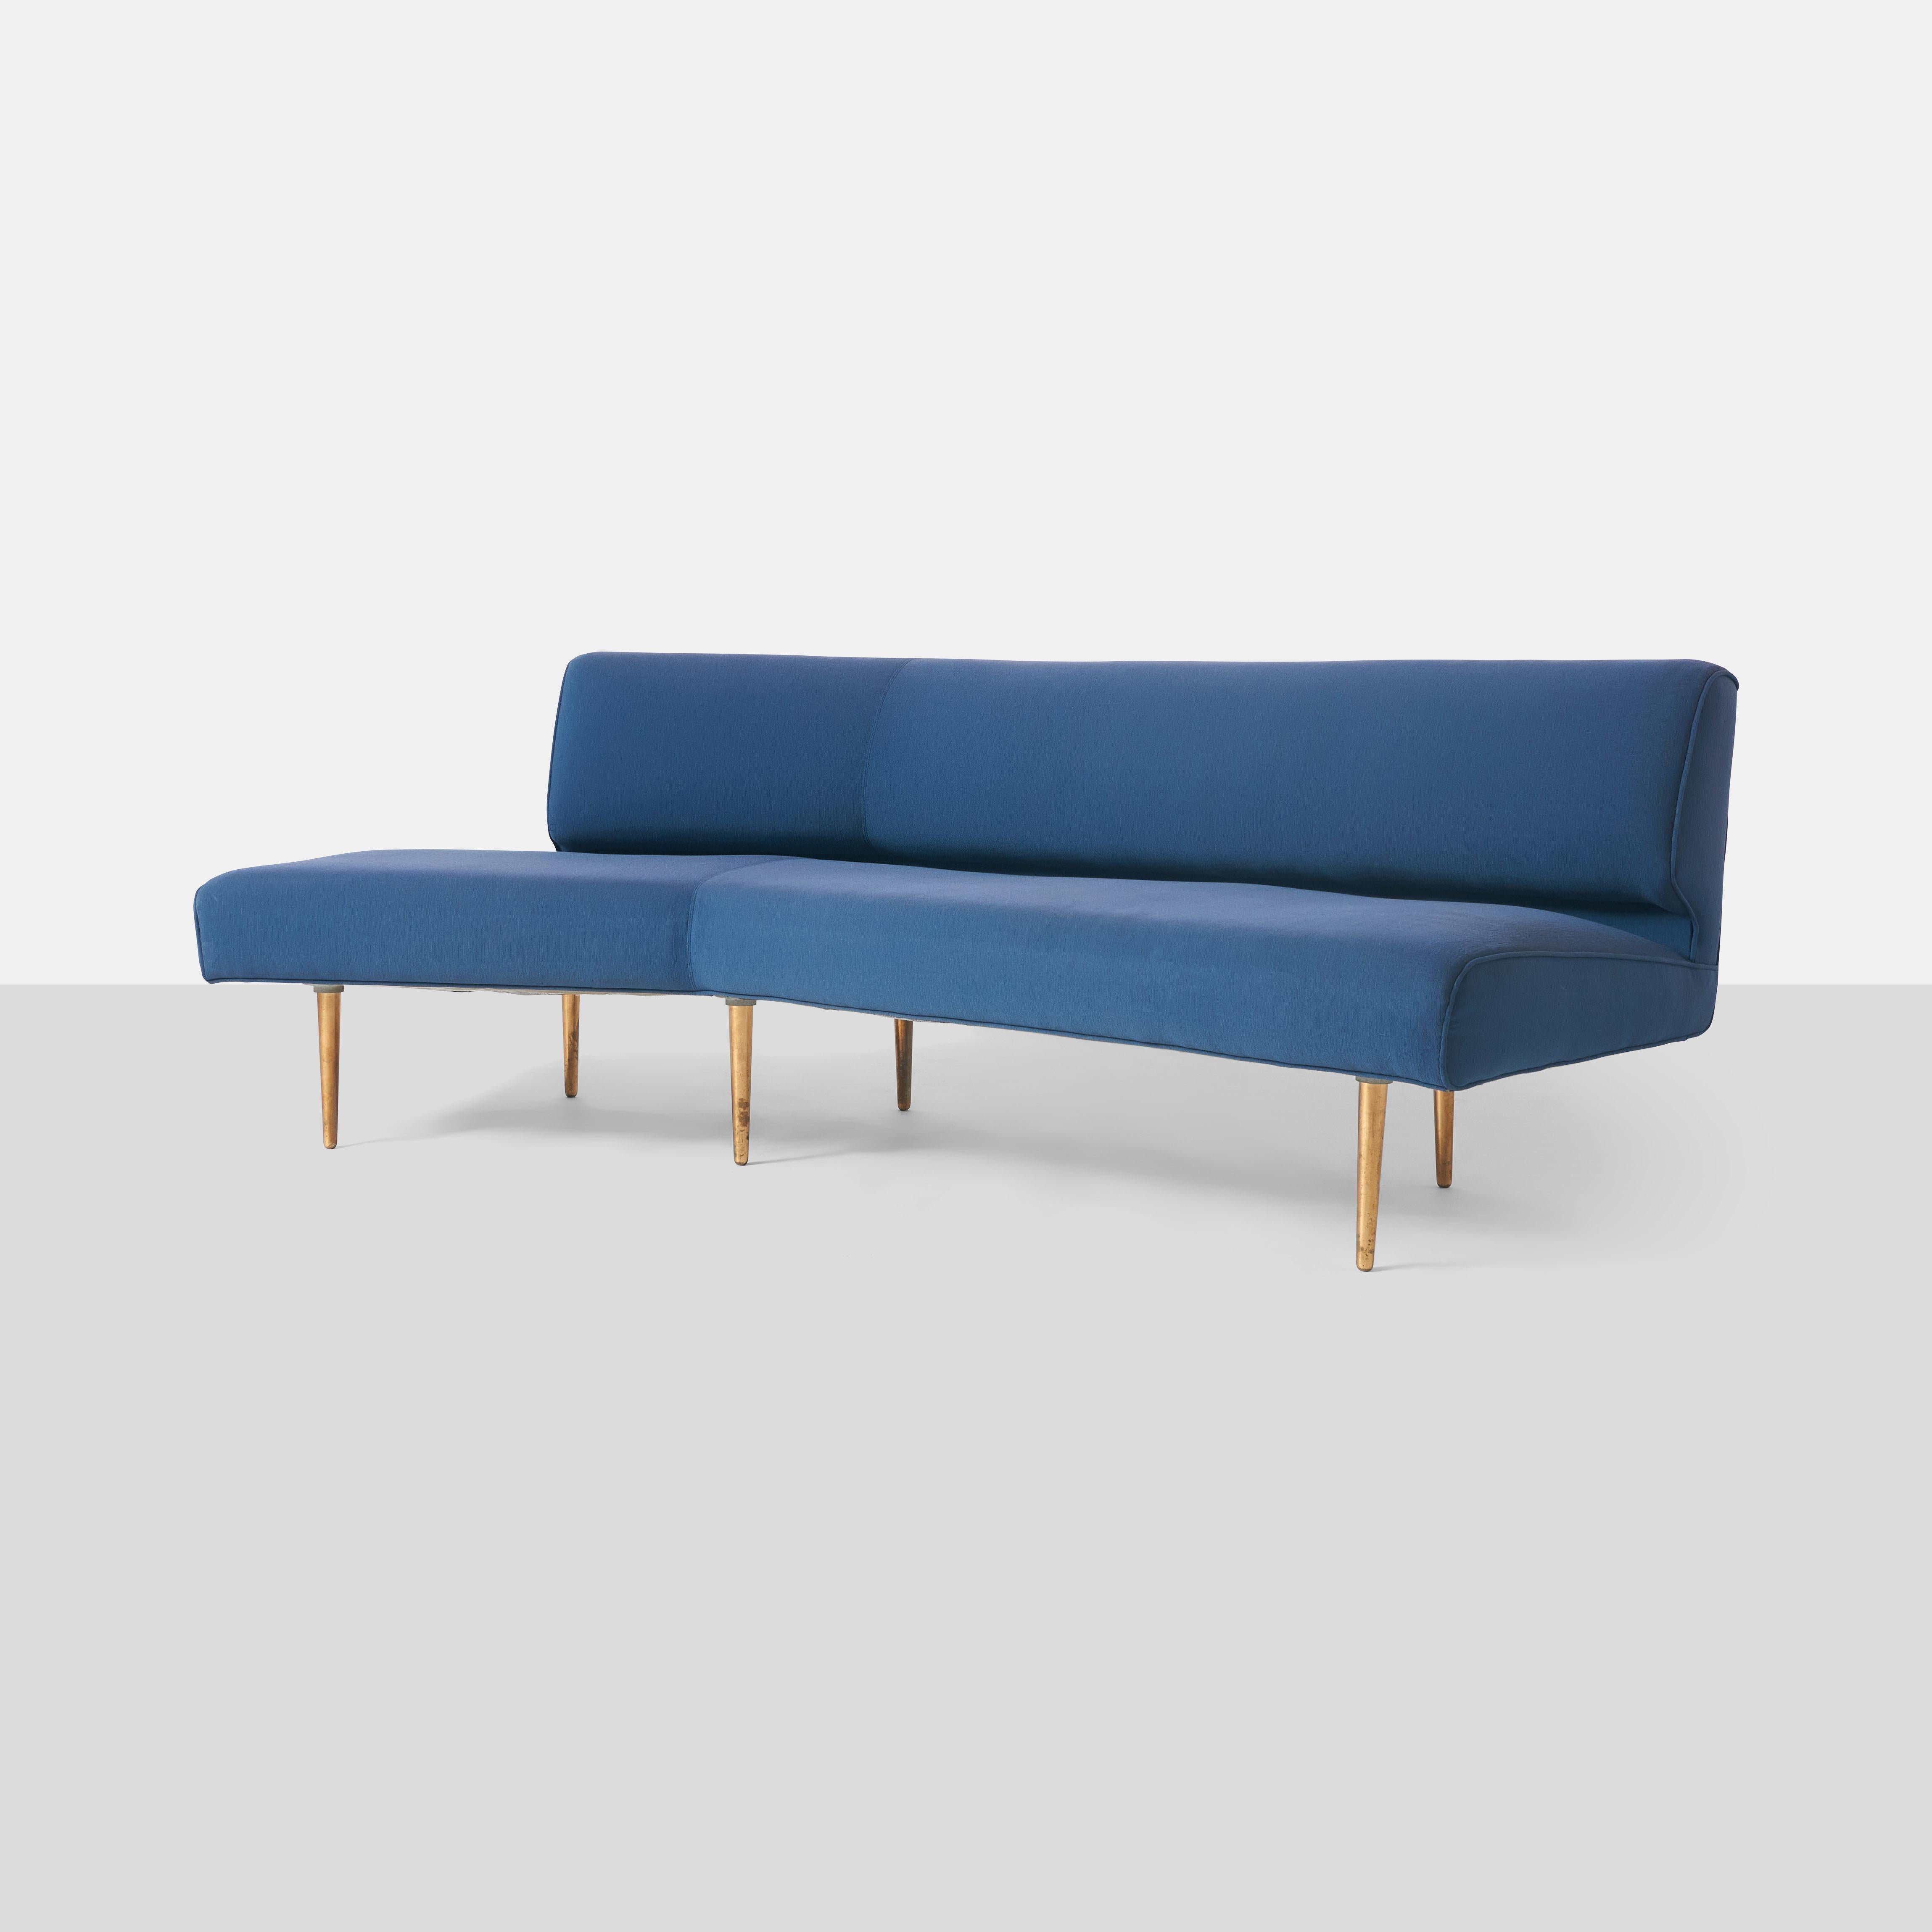 An early channel back sofa with brass legs and covered in blue fabric by Edward Wormley. Model #4757 designed in 1947. The fabric is tired and should be replaced.

Price shown without restoration.